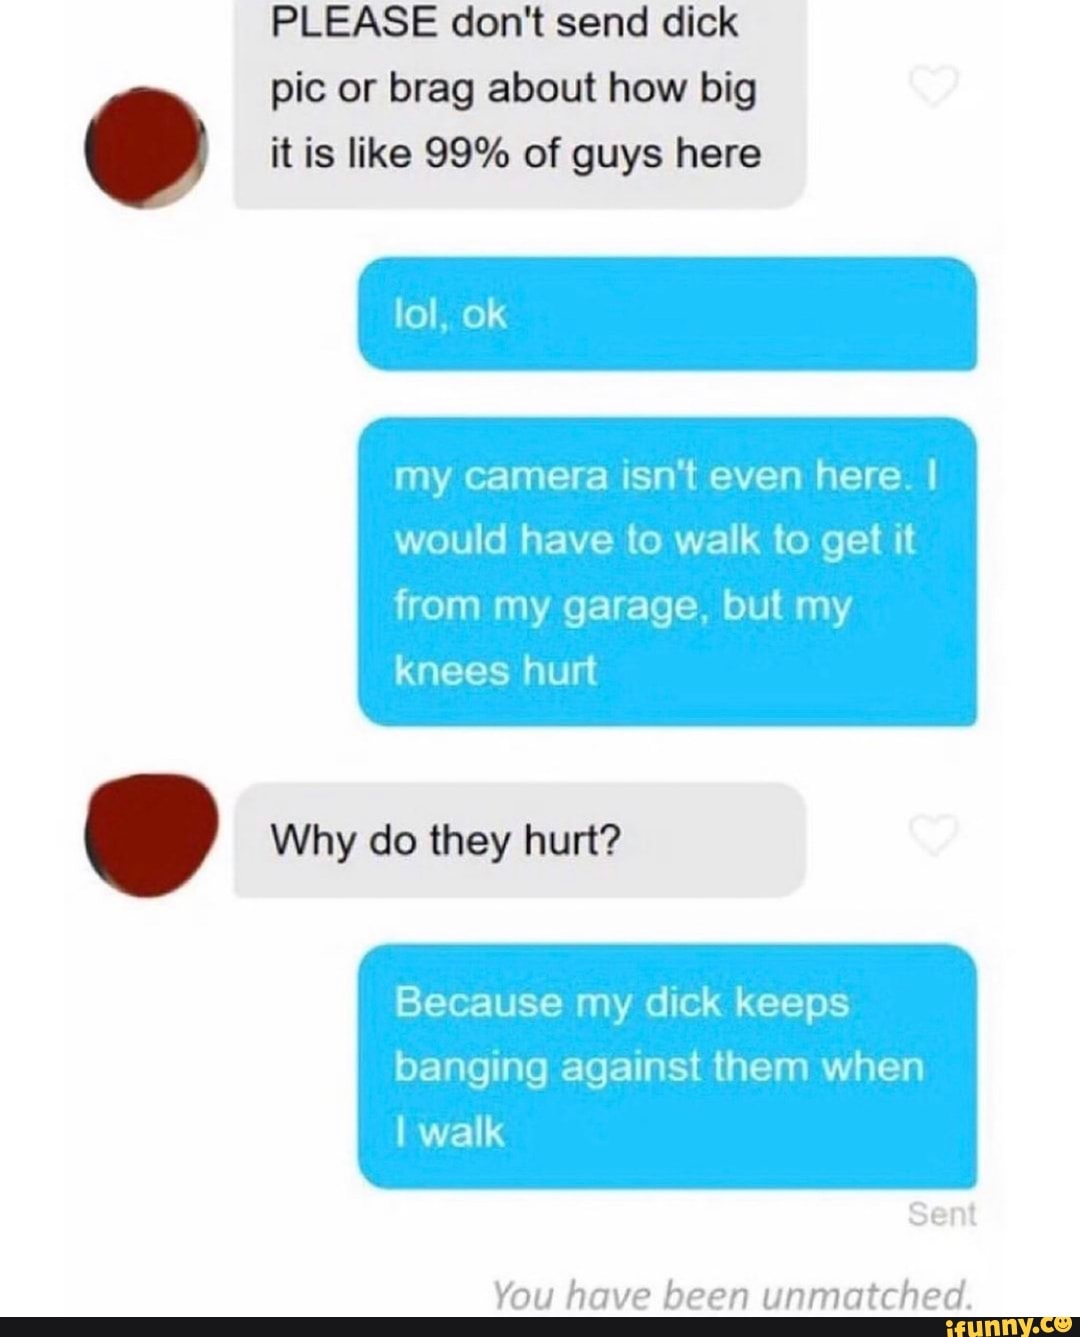 Tifu by sending a dick pic to 25 people